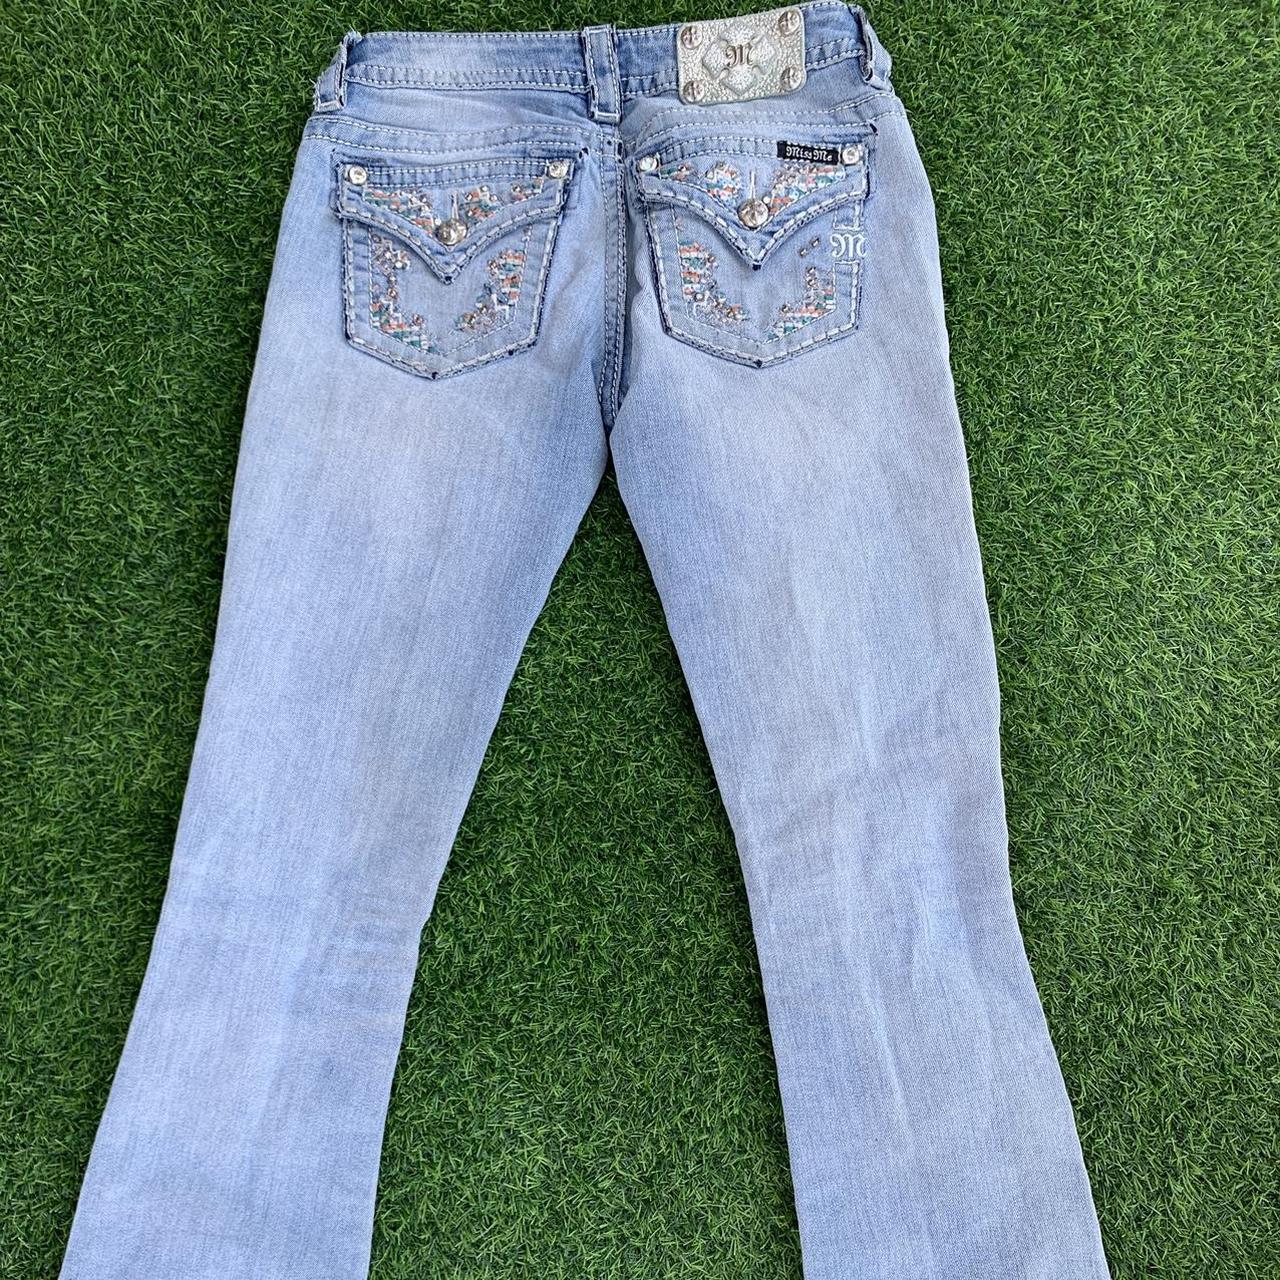 miss-me-jeans-boot-size-25-no-paypal-limited-depop